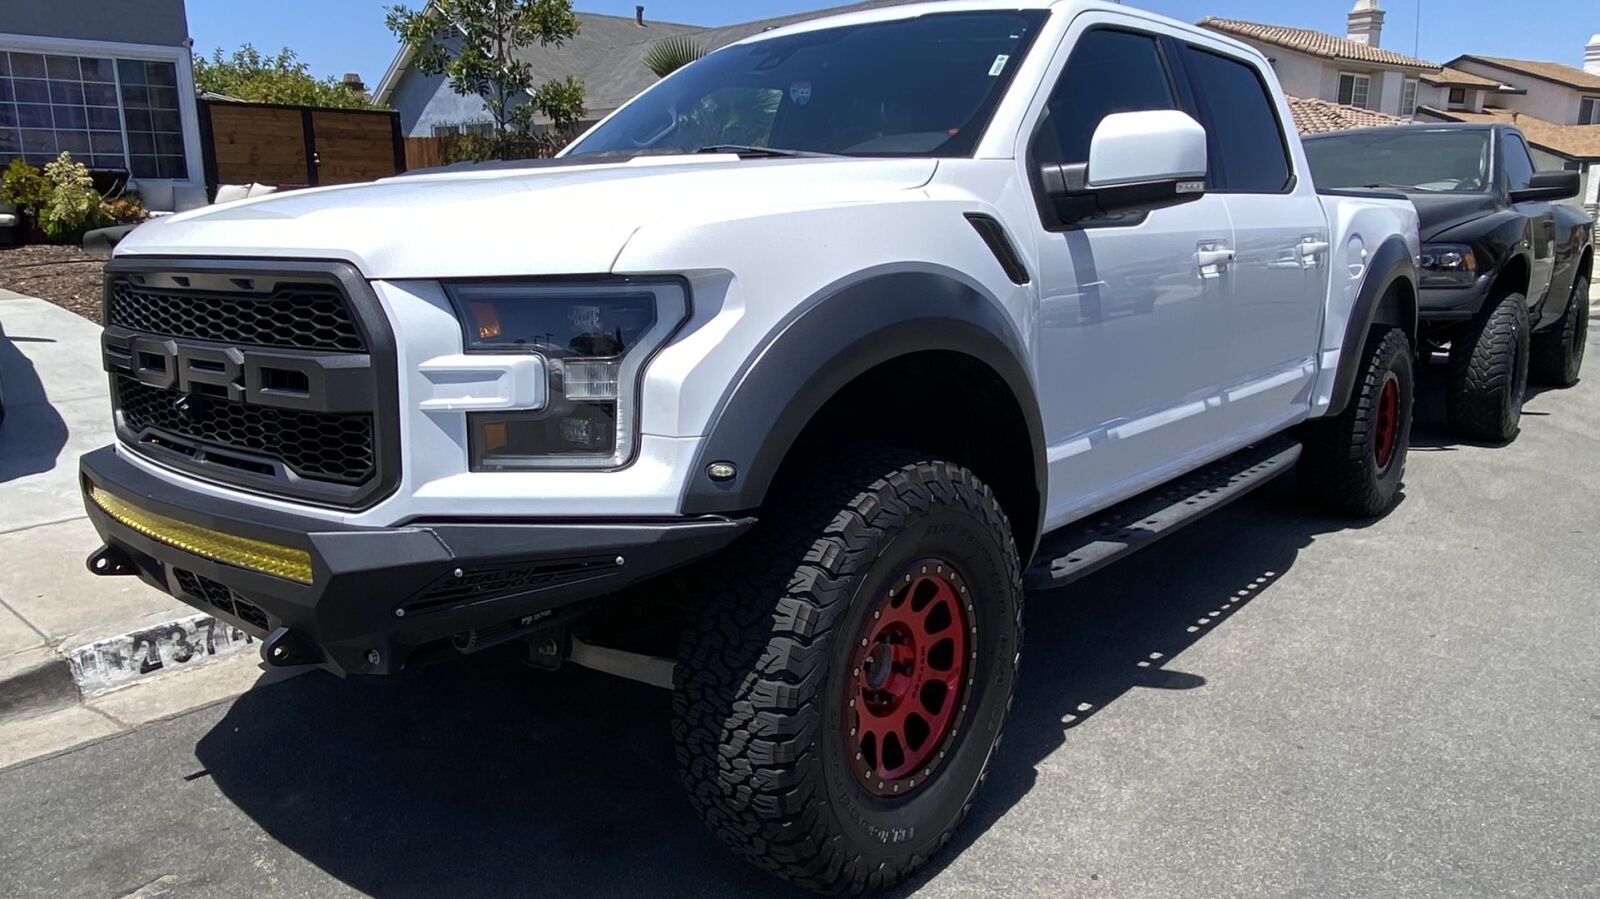 For Sale: 2018 ford raptor upgraded  - photo0